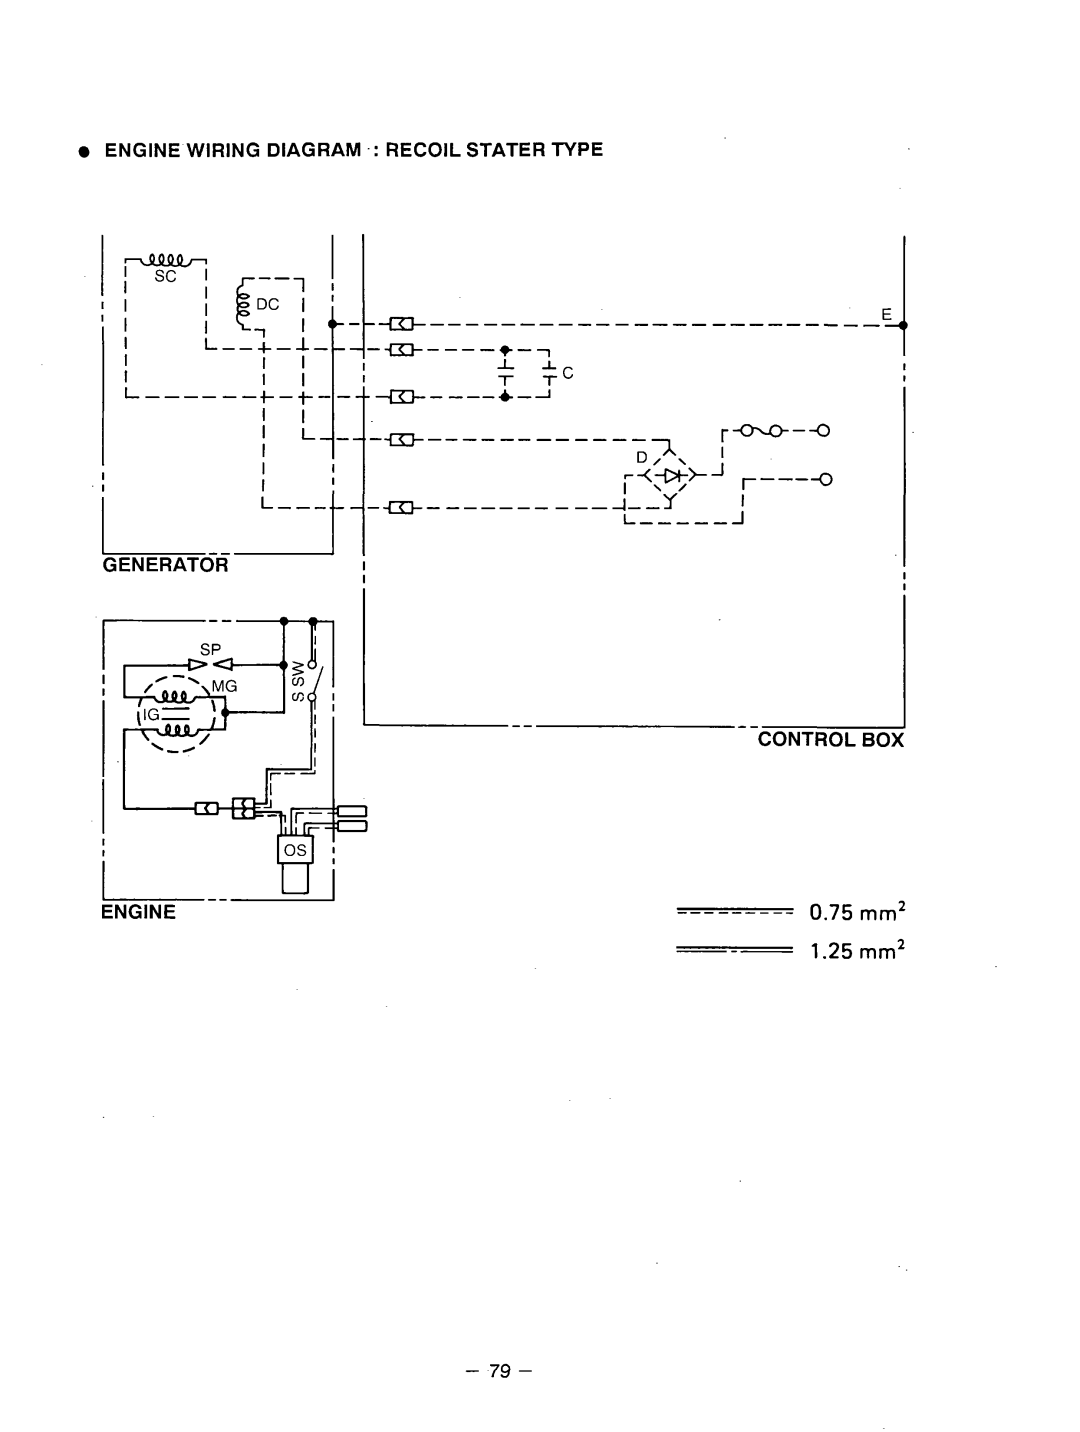 Subaru Robin Power Products RGX3510 manual r m, J r----0, Engine Wiring Diagram .: Recoil Stater Type 